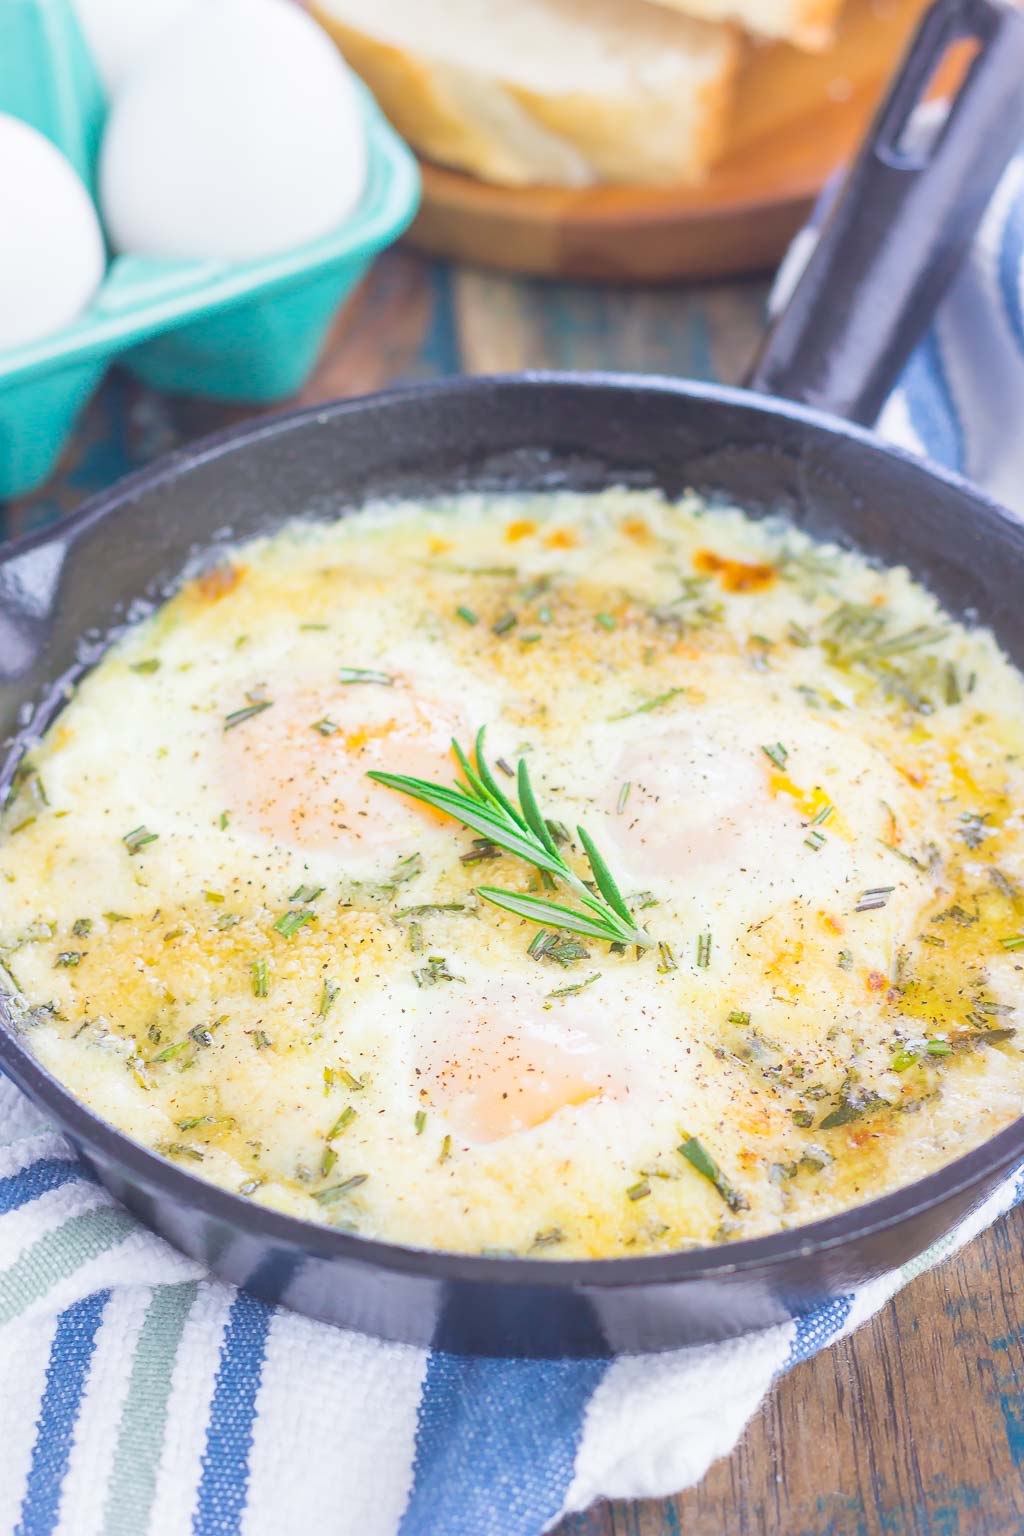 Oven Baked Eggs with Rosemary and Thyme make a simple breakfast that's loaded with flavor. Fresh herbs and a sprinkling of cheese give this dish a savory blend that's perfect for a cozy dish. Serve with a side of crusty bread and this will quickly become a new favorite!